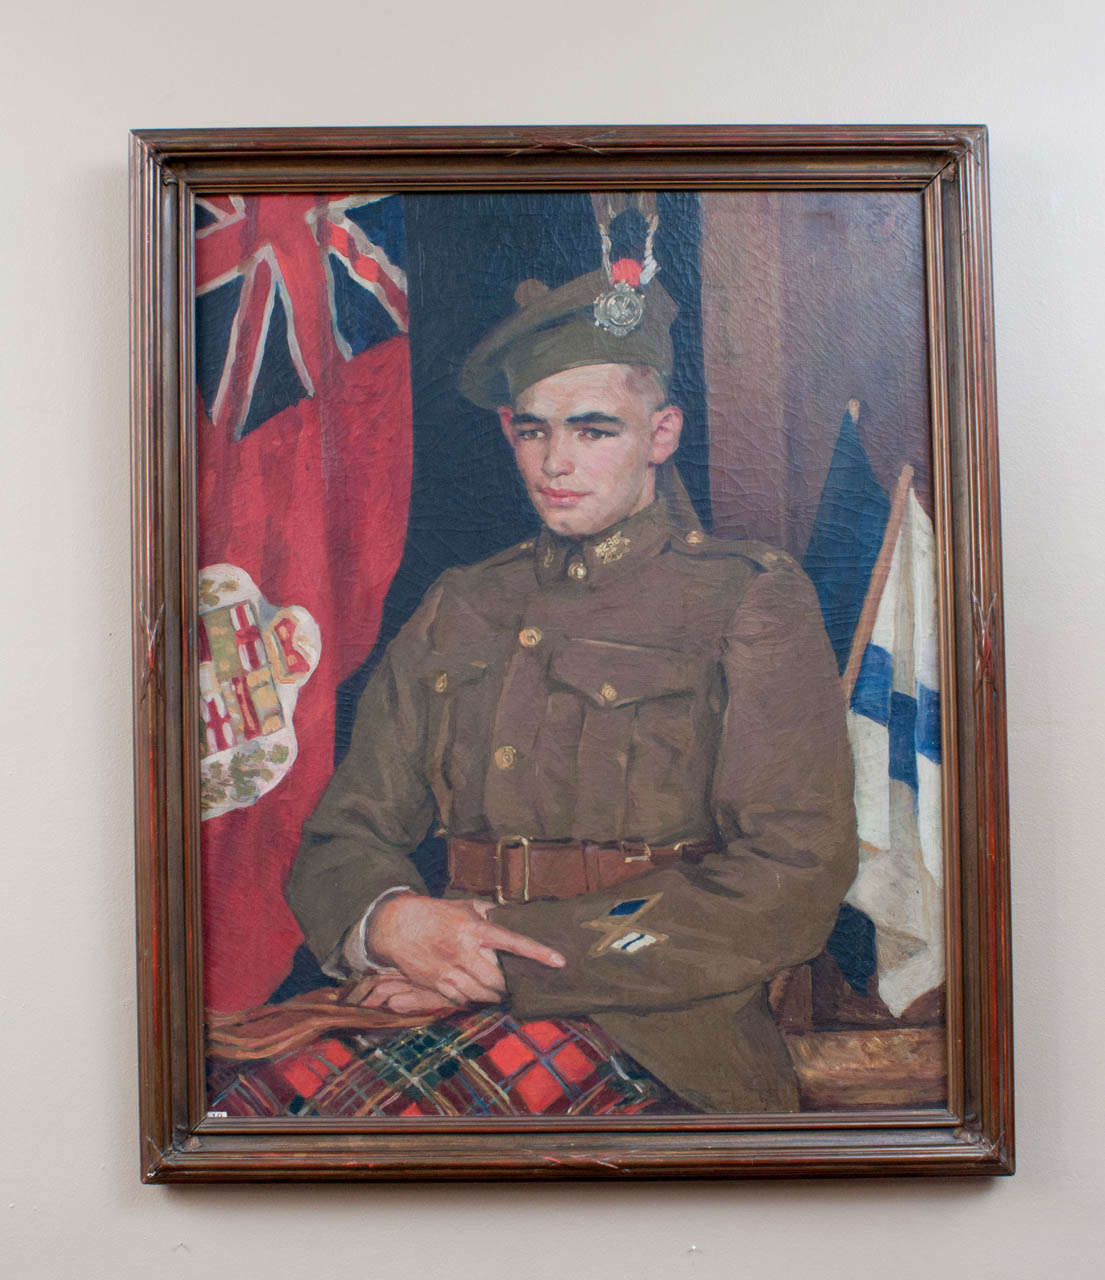 This wonderful portrait of a young man in New Brunswick Kilties uniform during World War I is both great art and an important historical artifact. Painted by Eben Farrington Comins (1875–1949), it was exhibited at the winter show of the National